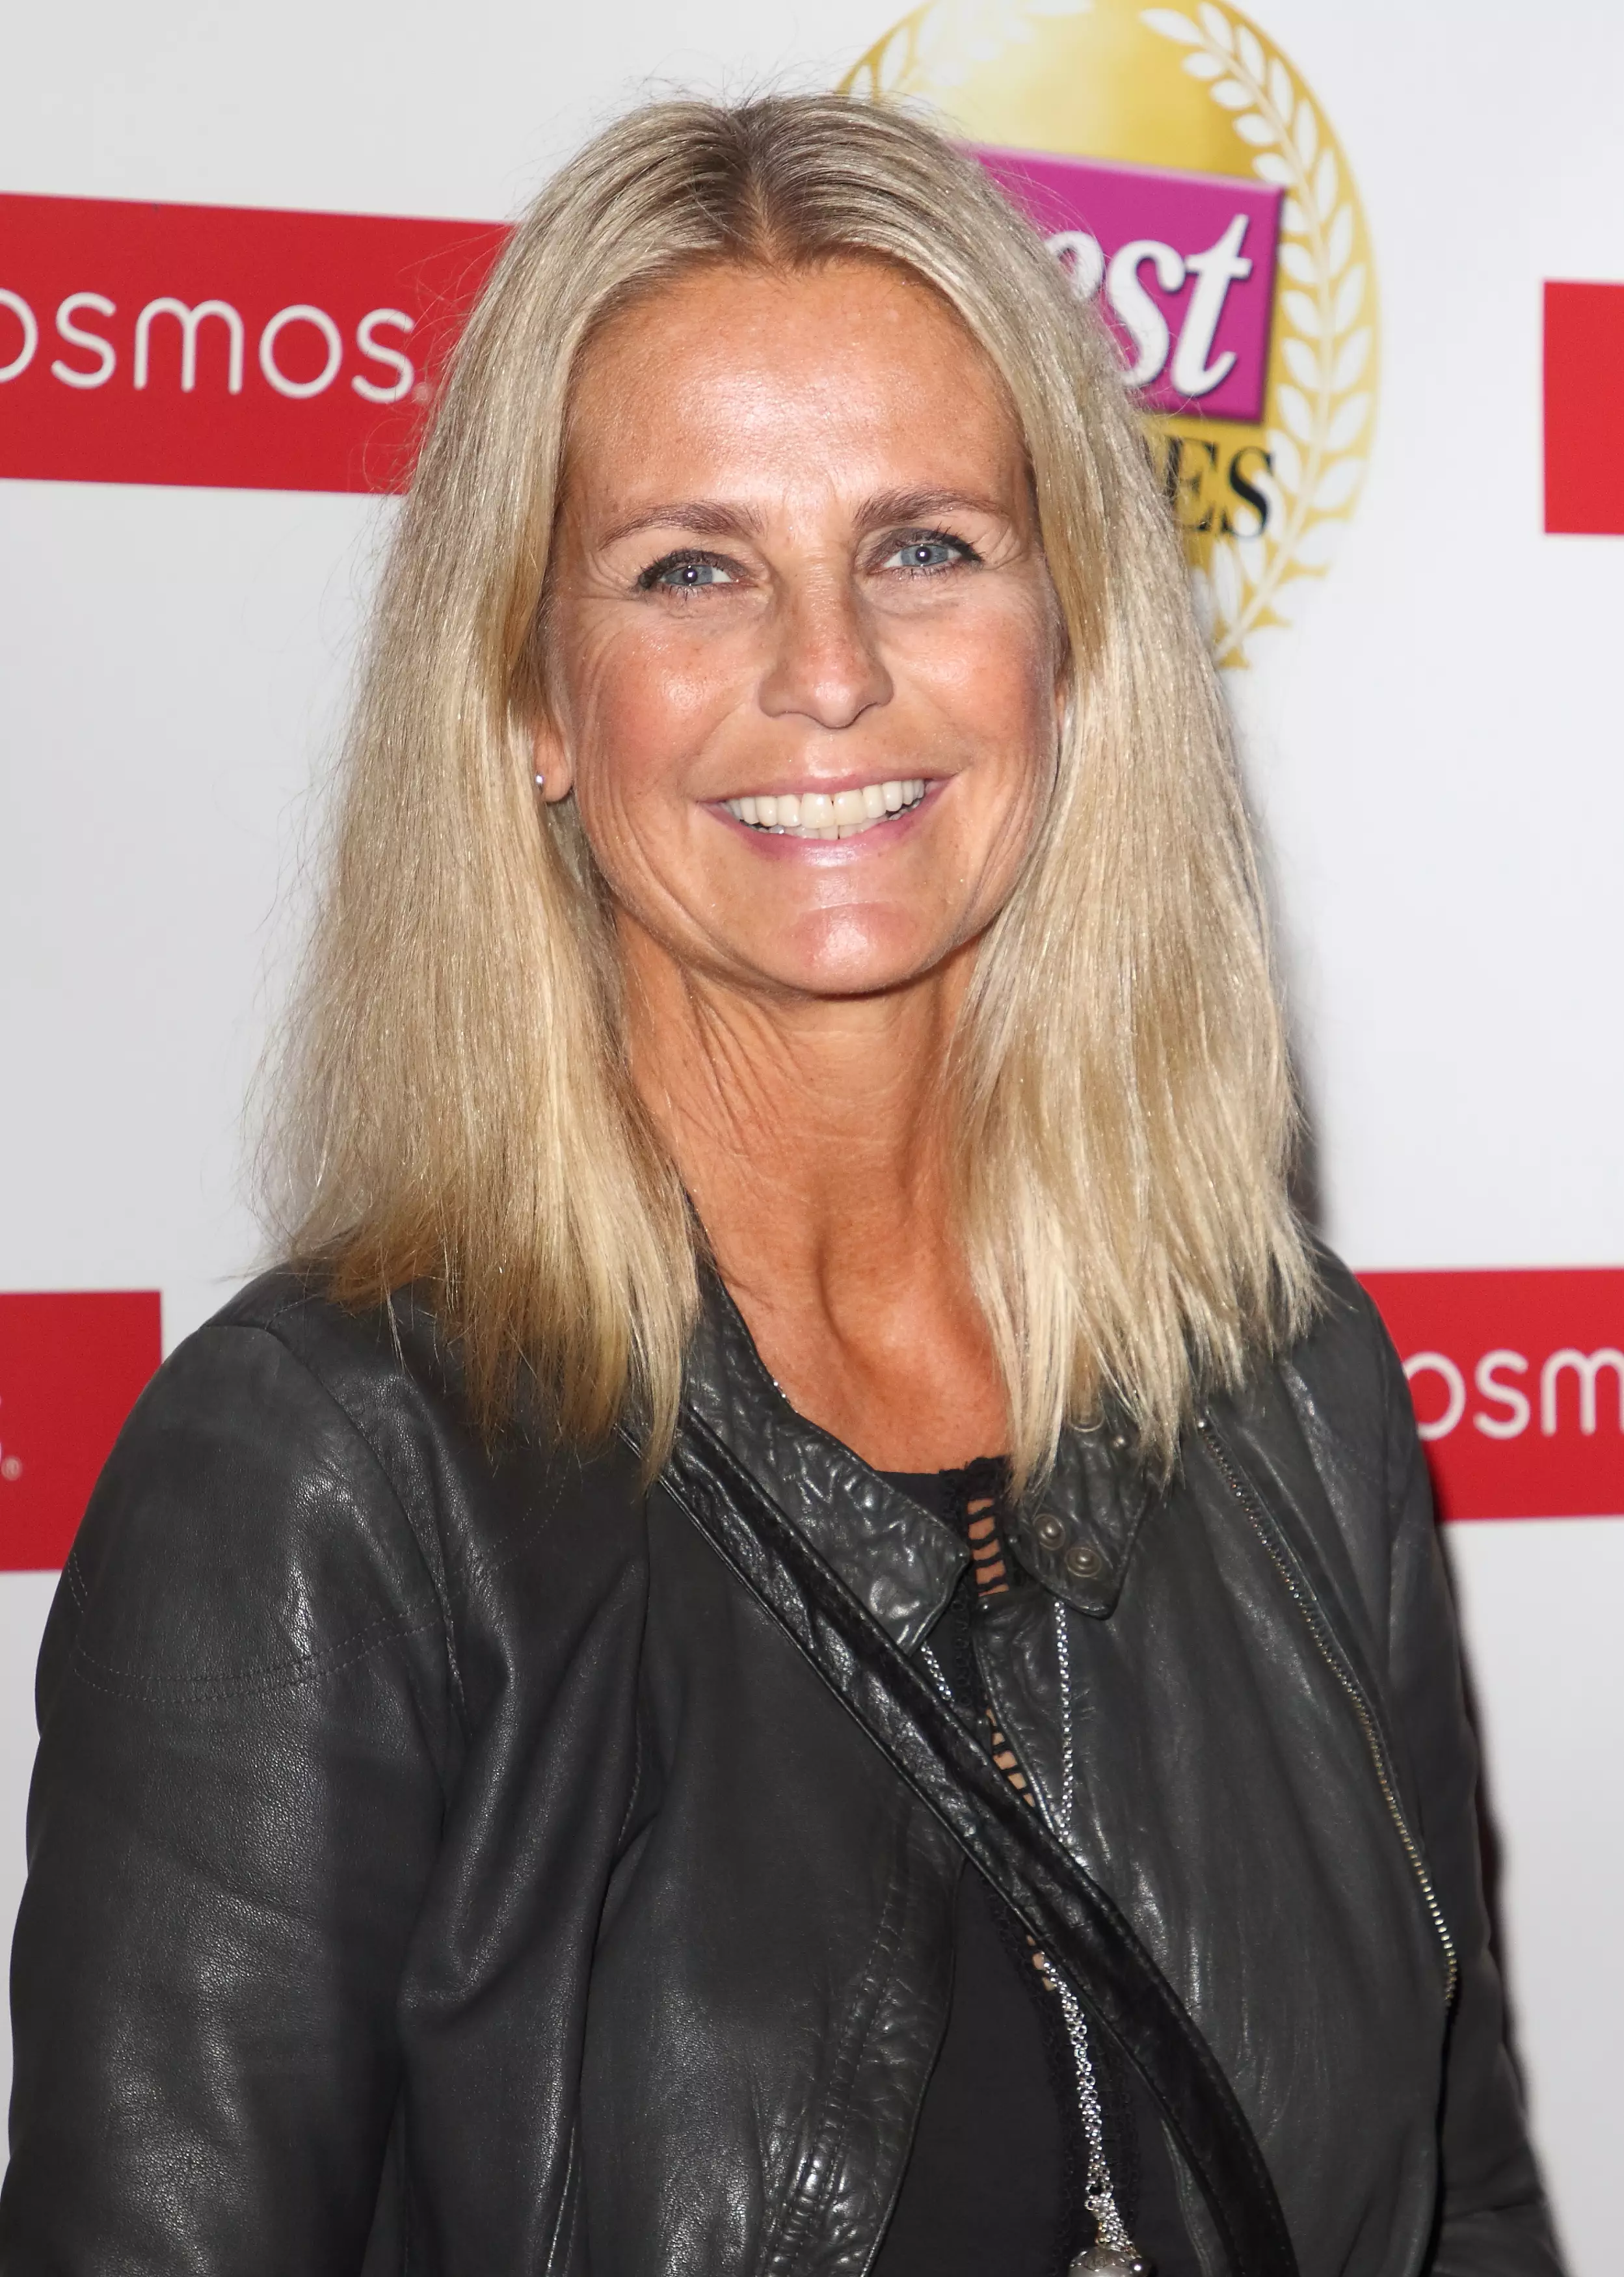 Ulrika Jonsson said she would happily date a 21-year-old.